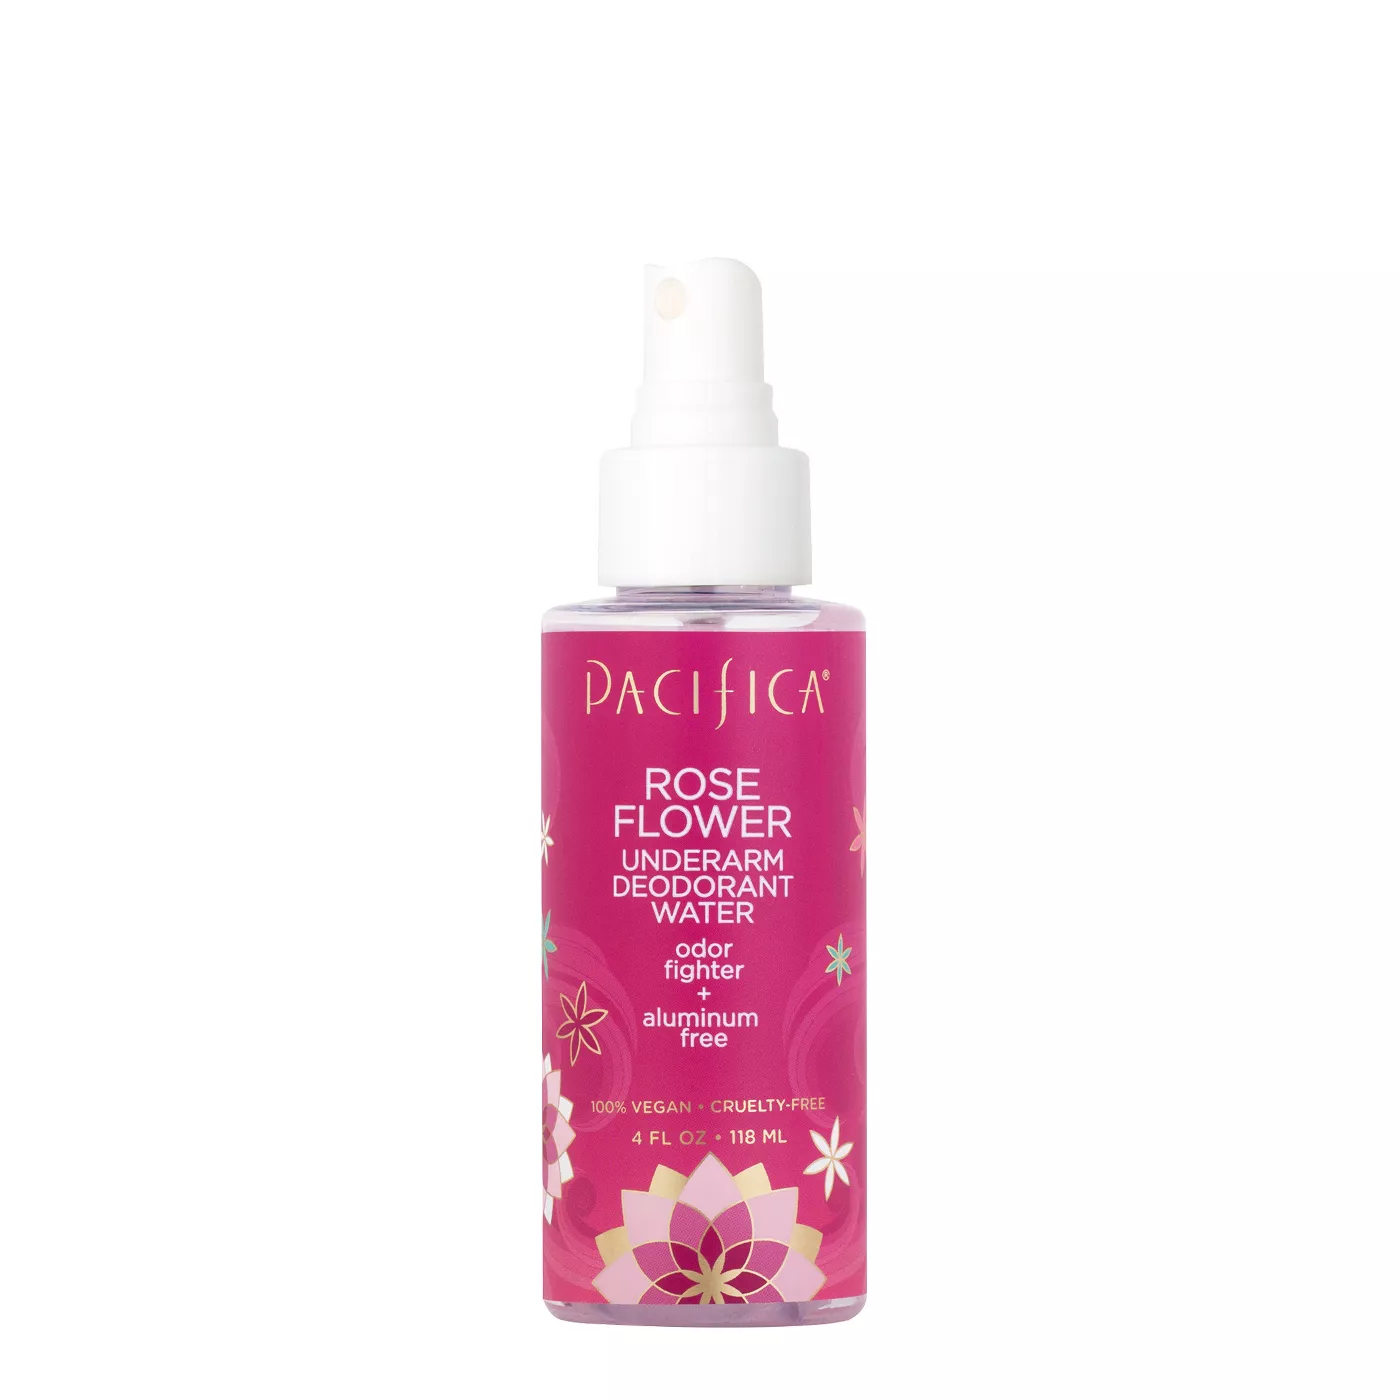 The Pacifica Rose Underarm Deodorant Spray travel product recommended by Tatyana Figueira on Pretty Progressive.